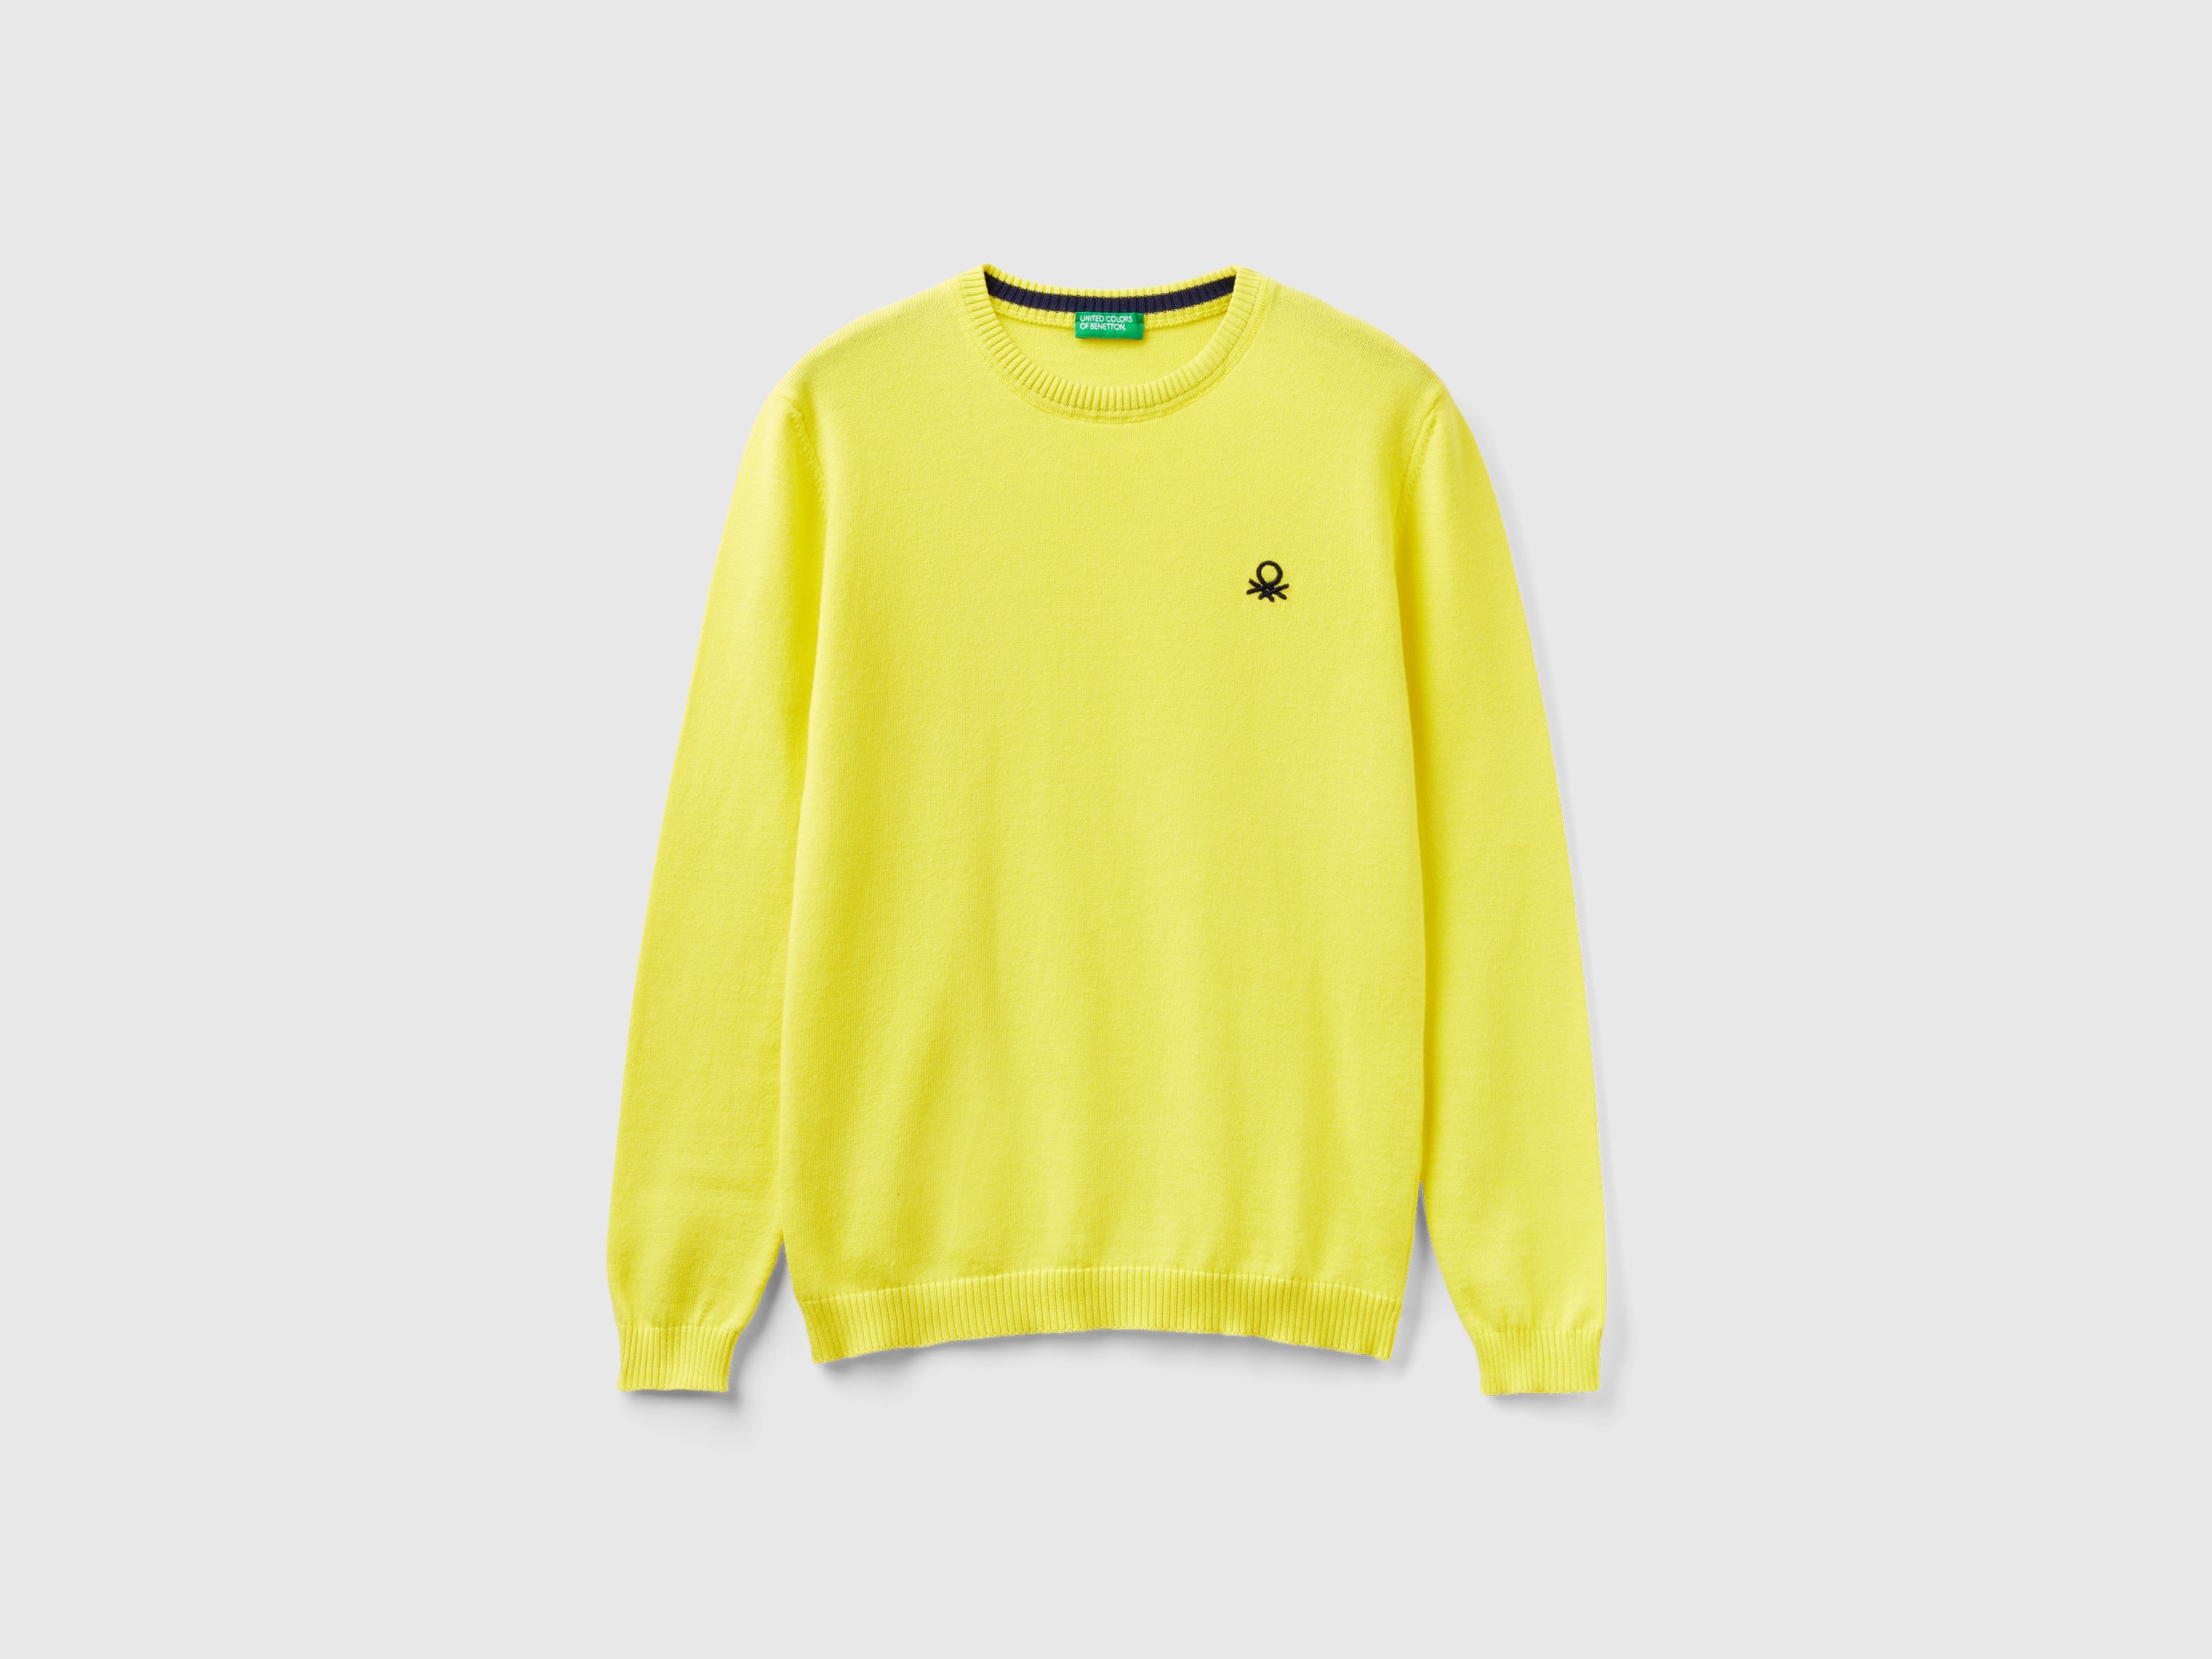 Benetton, Sweater In Pure Cotton With Logo, size 3XL, Yellow, Kids